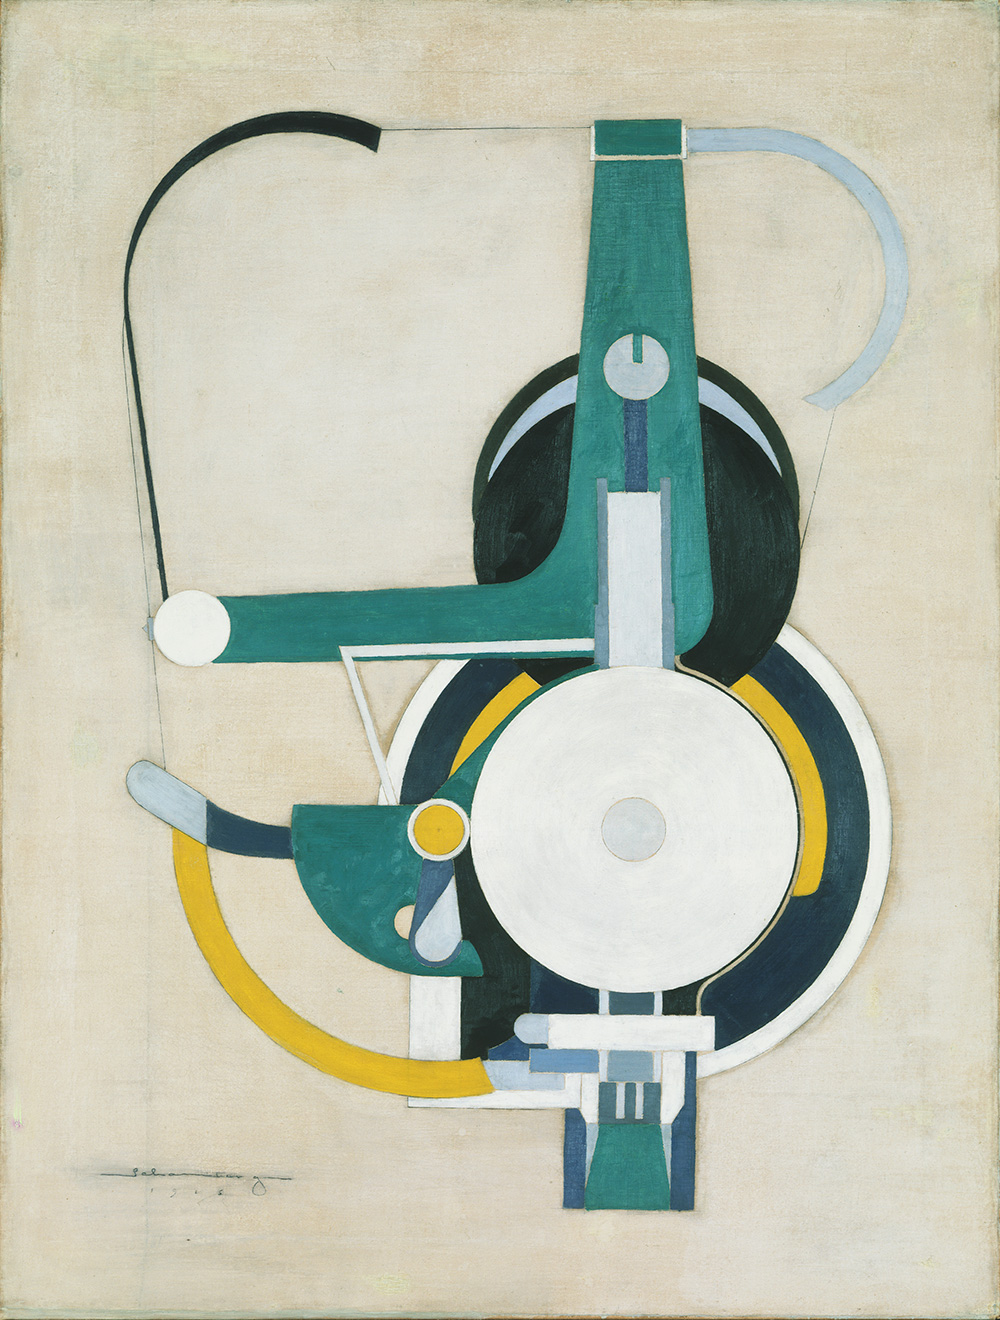 Morton Linvingston Schamberg, "Painting (Formerly Machine)," 1916. Oil on canvas, 30 1/8 x 22 3/4 in. (76.5 x 57.8 cm). Yale University Art Gallery, New Haven, Connecticut, Gift of Collection Société Anonyme, 1941.673